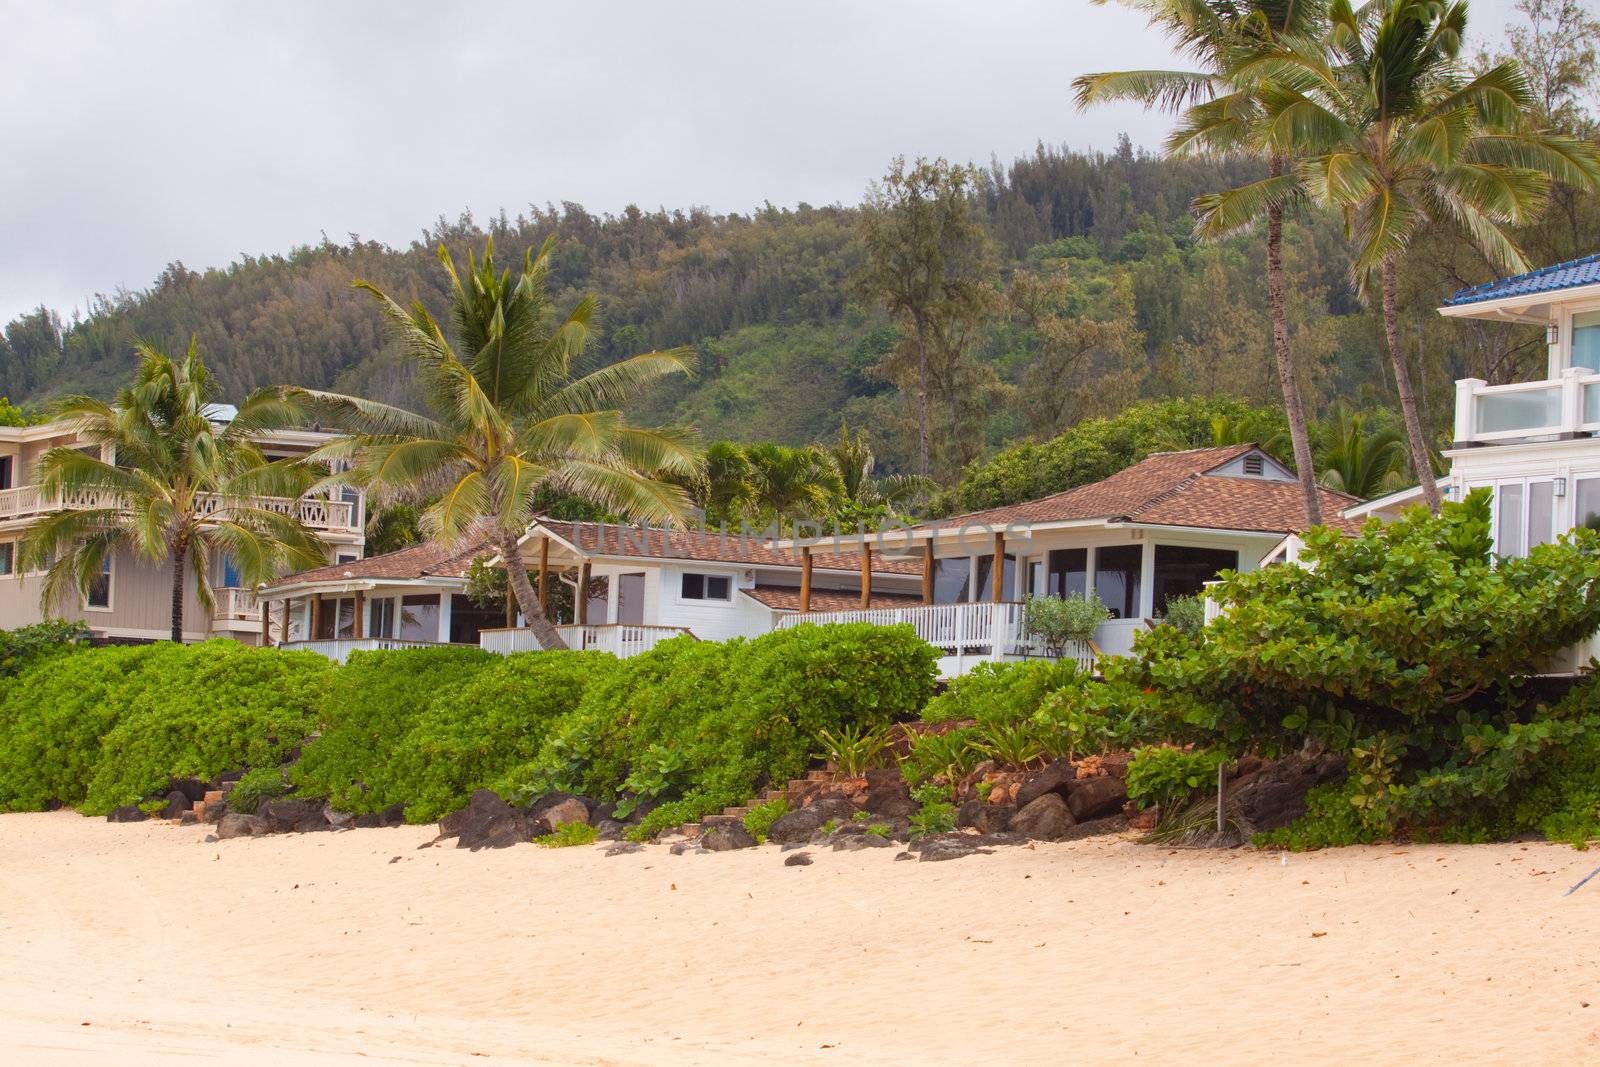 Paradise awaits with these great vacation home rentals on the north shore of oahu hawaii.